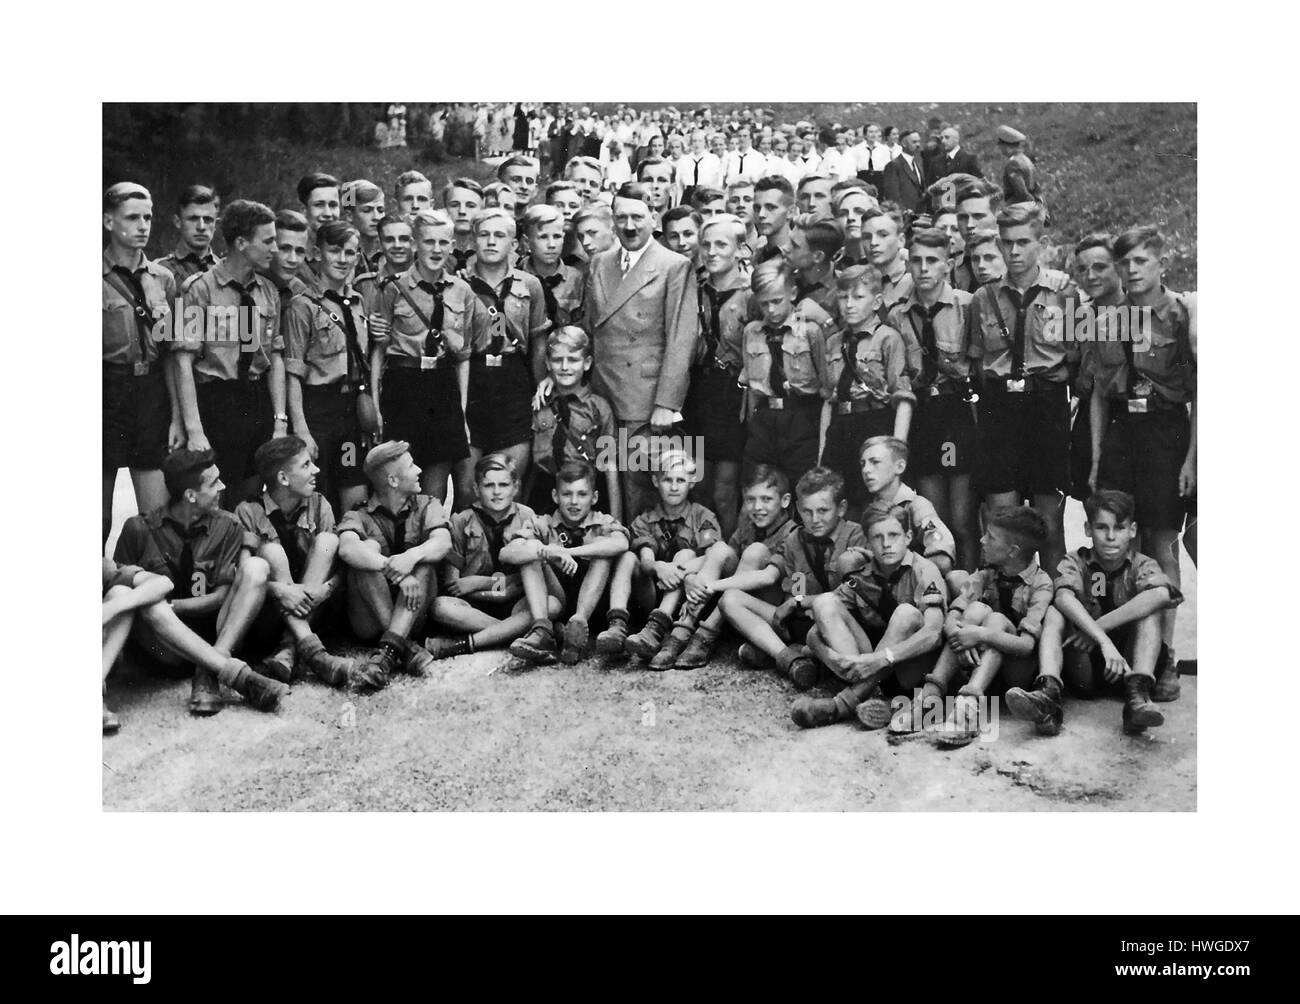 The Hitler Youth 1930's young men in uniform meeting Hitler pre-war at the Obersalzberg 1937 Germany Group Photograph Stock Photo